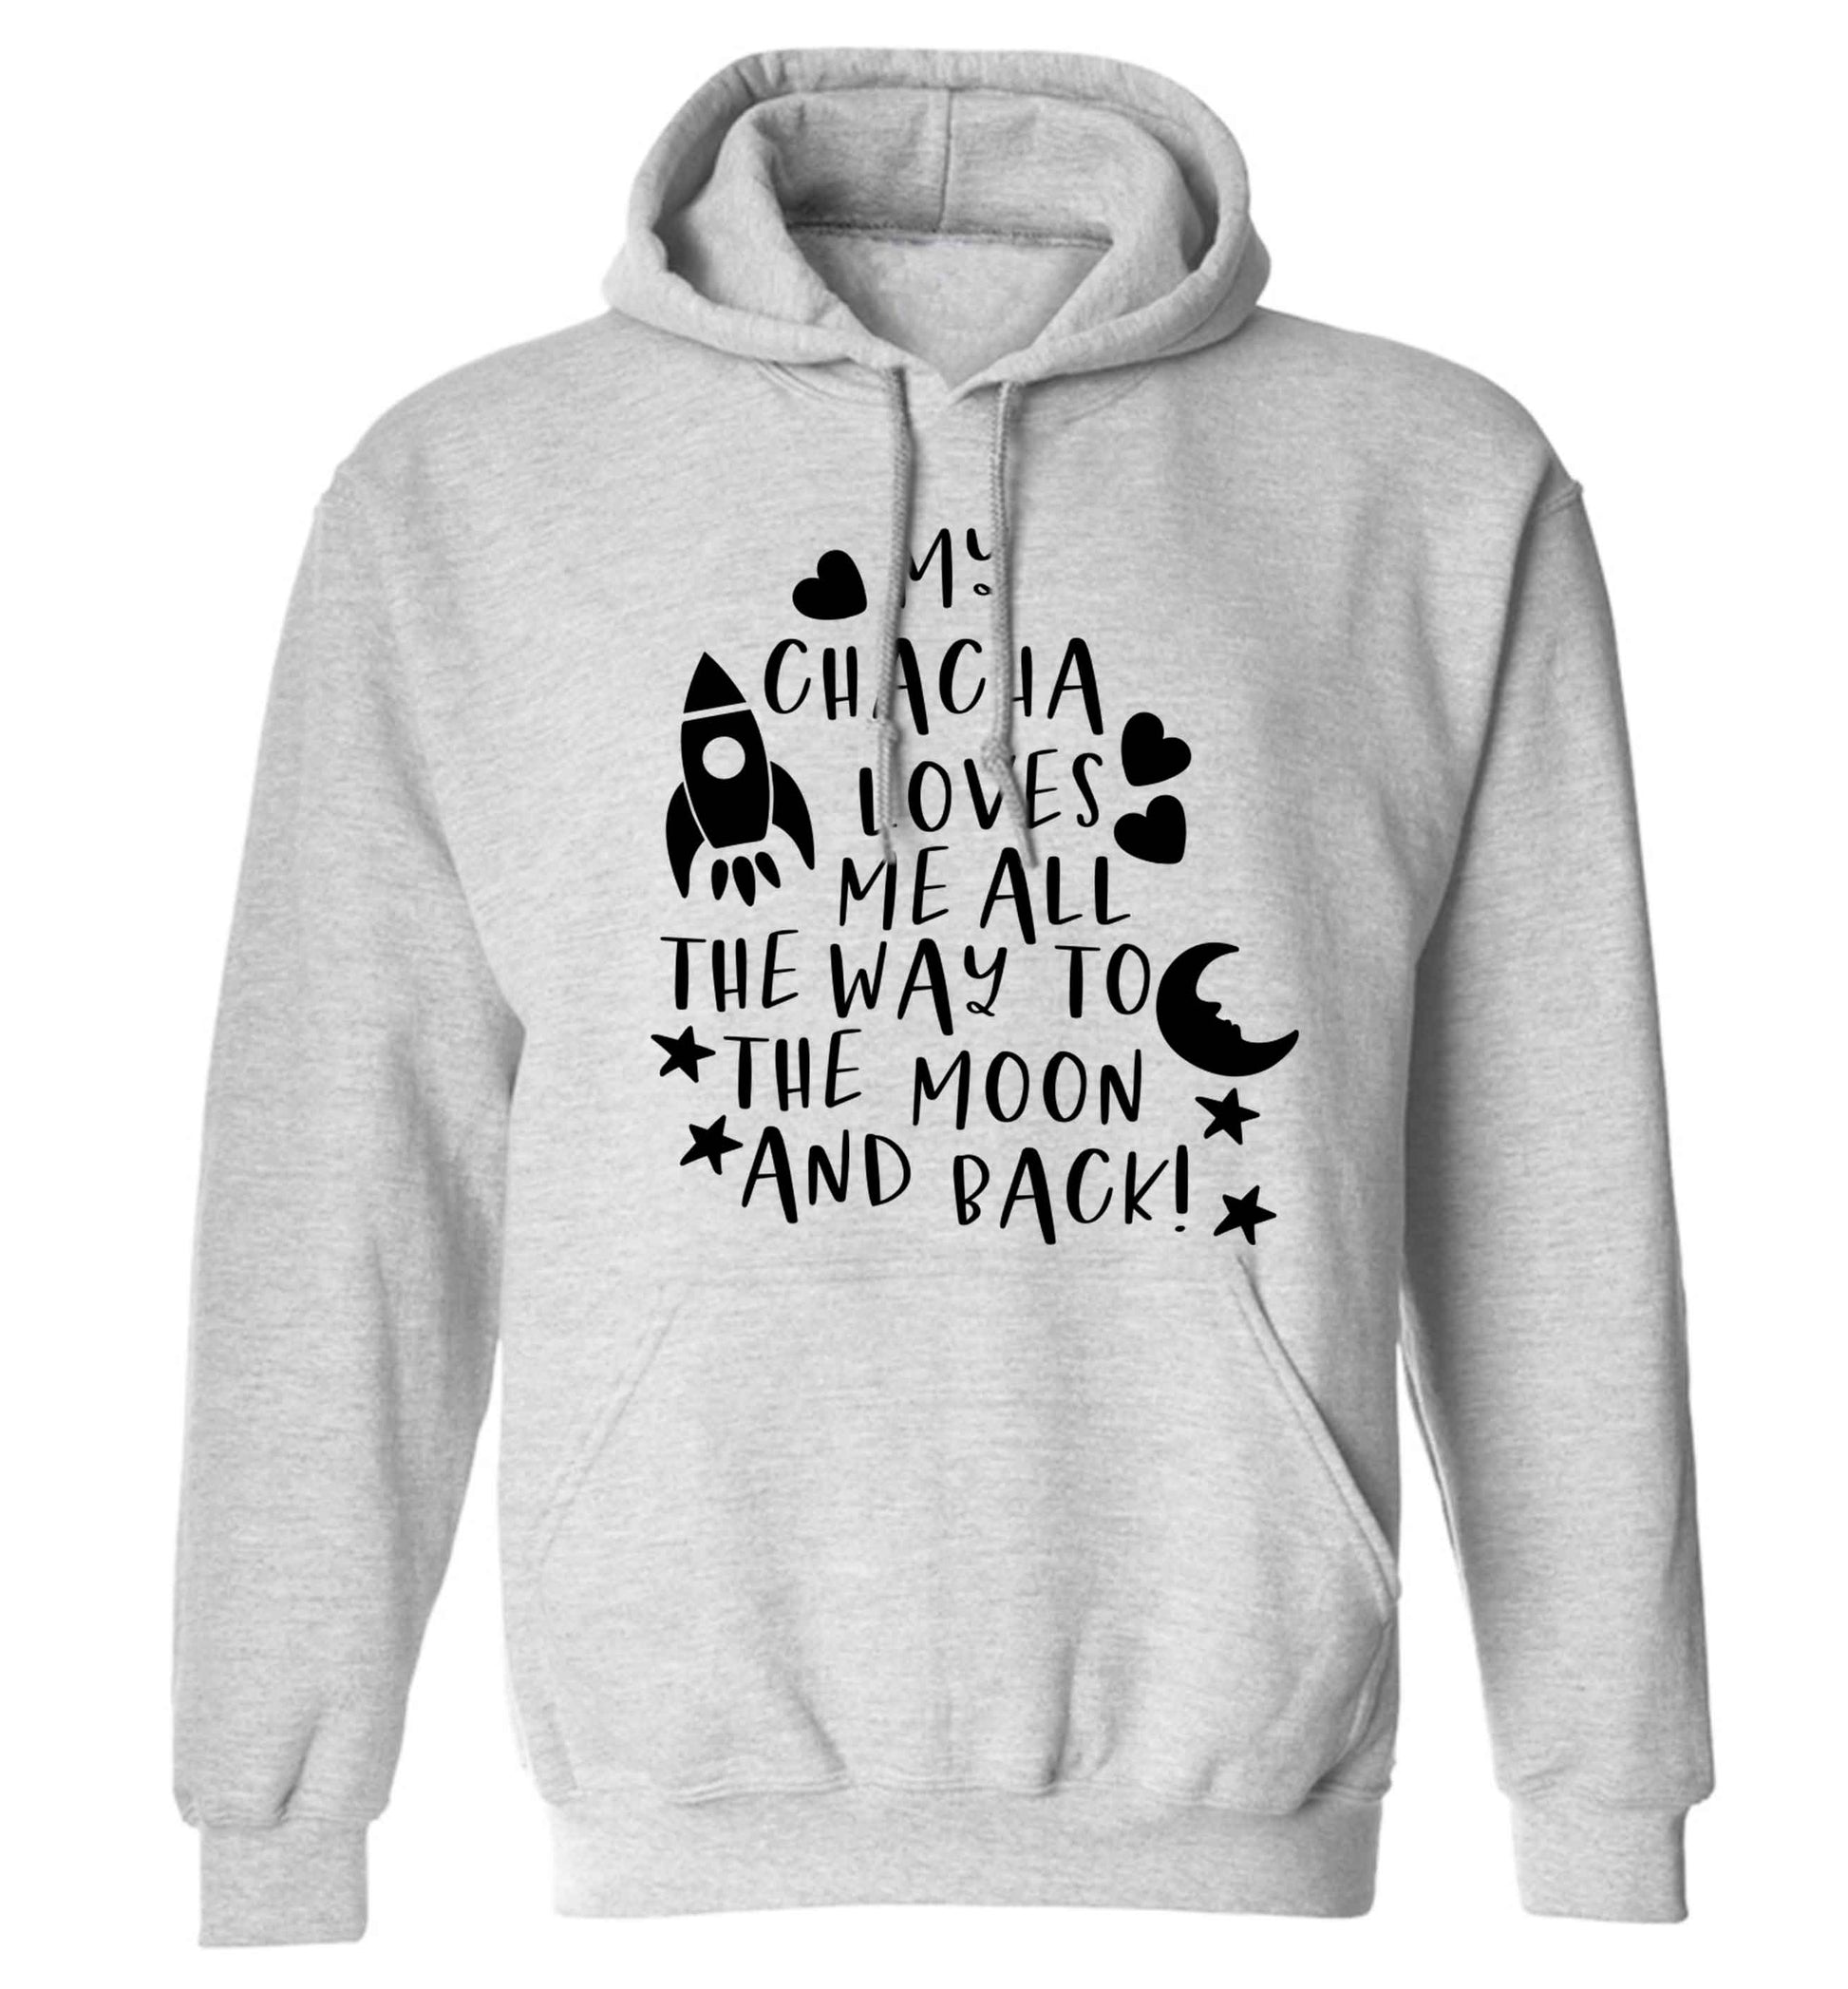 My chacha loves me all the way to the moon and back adults unisex grey hoodie 2XL